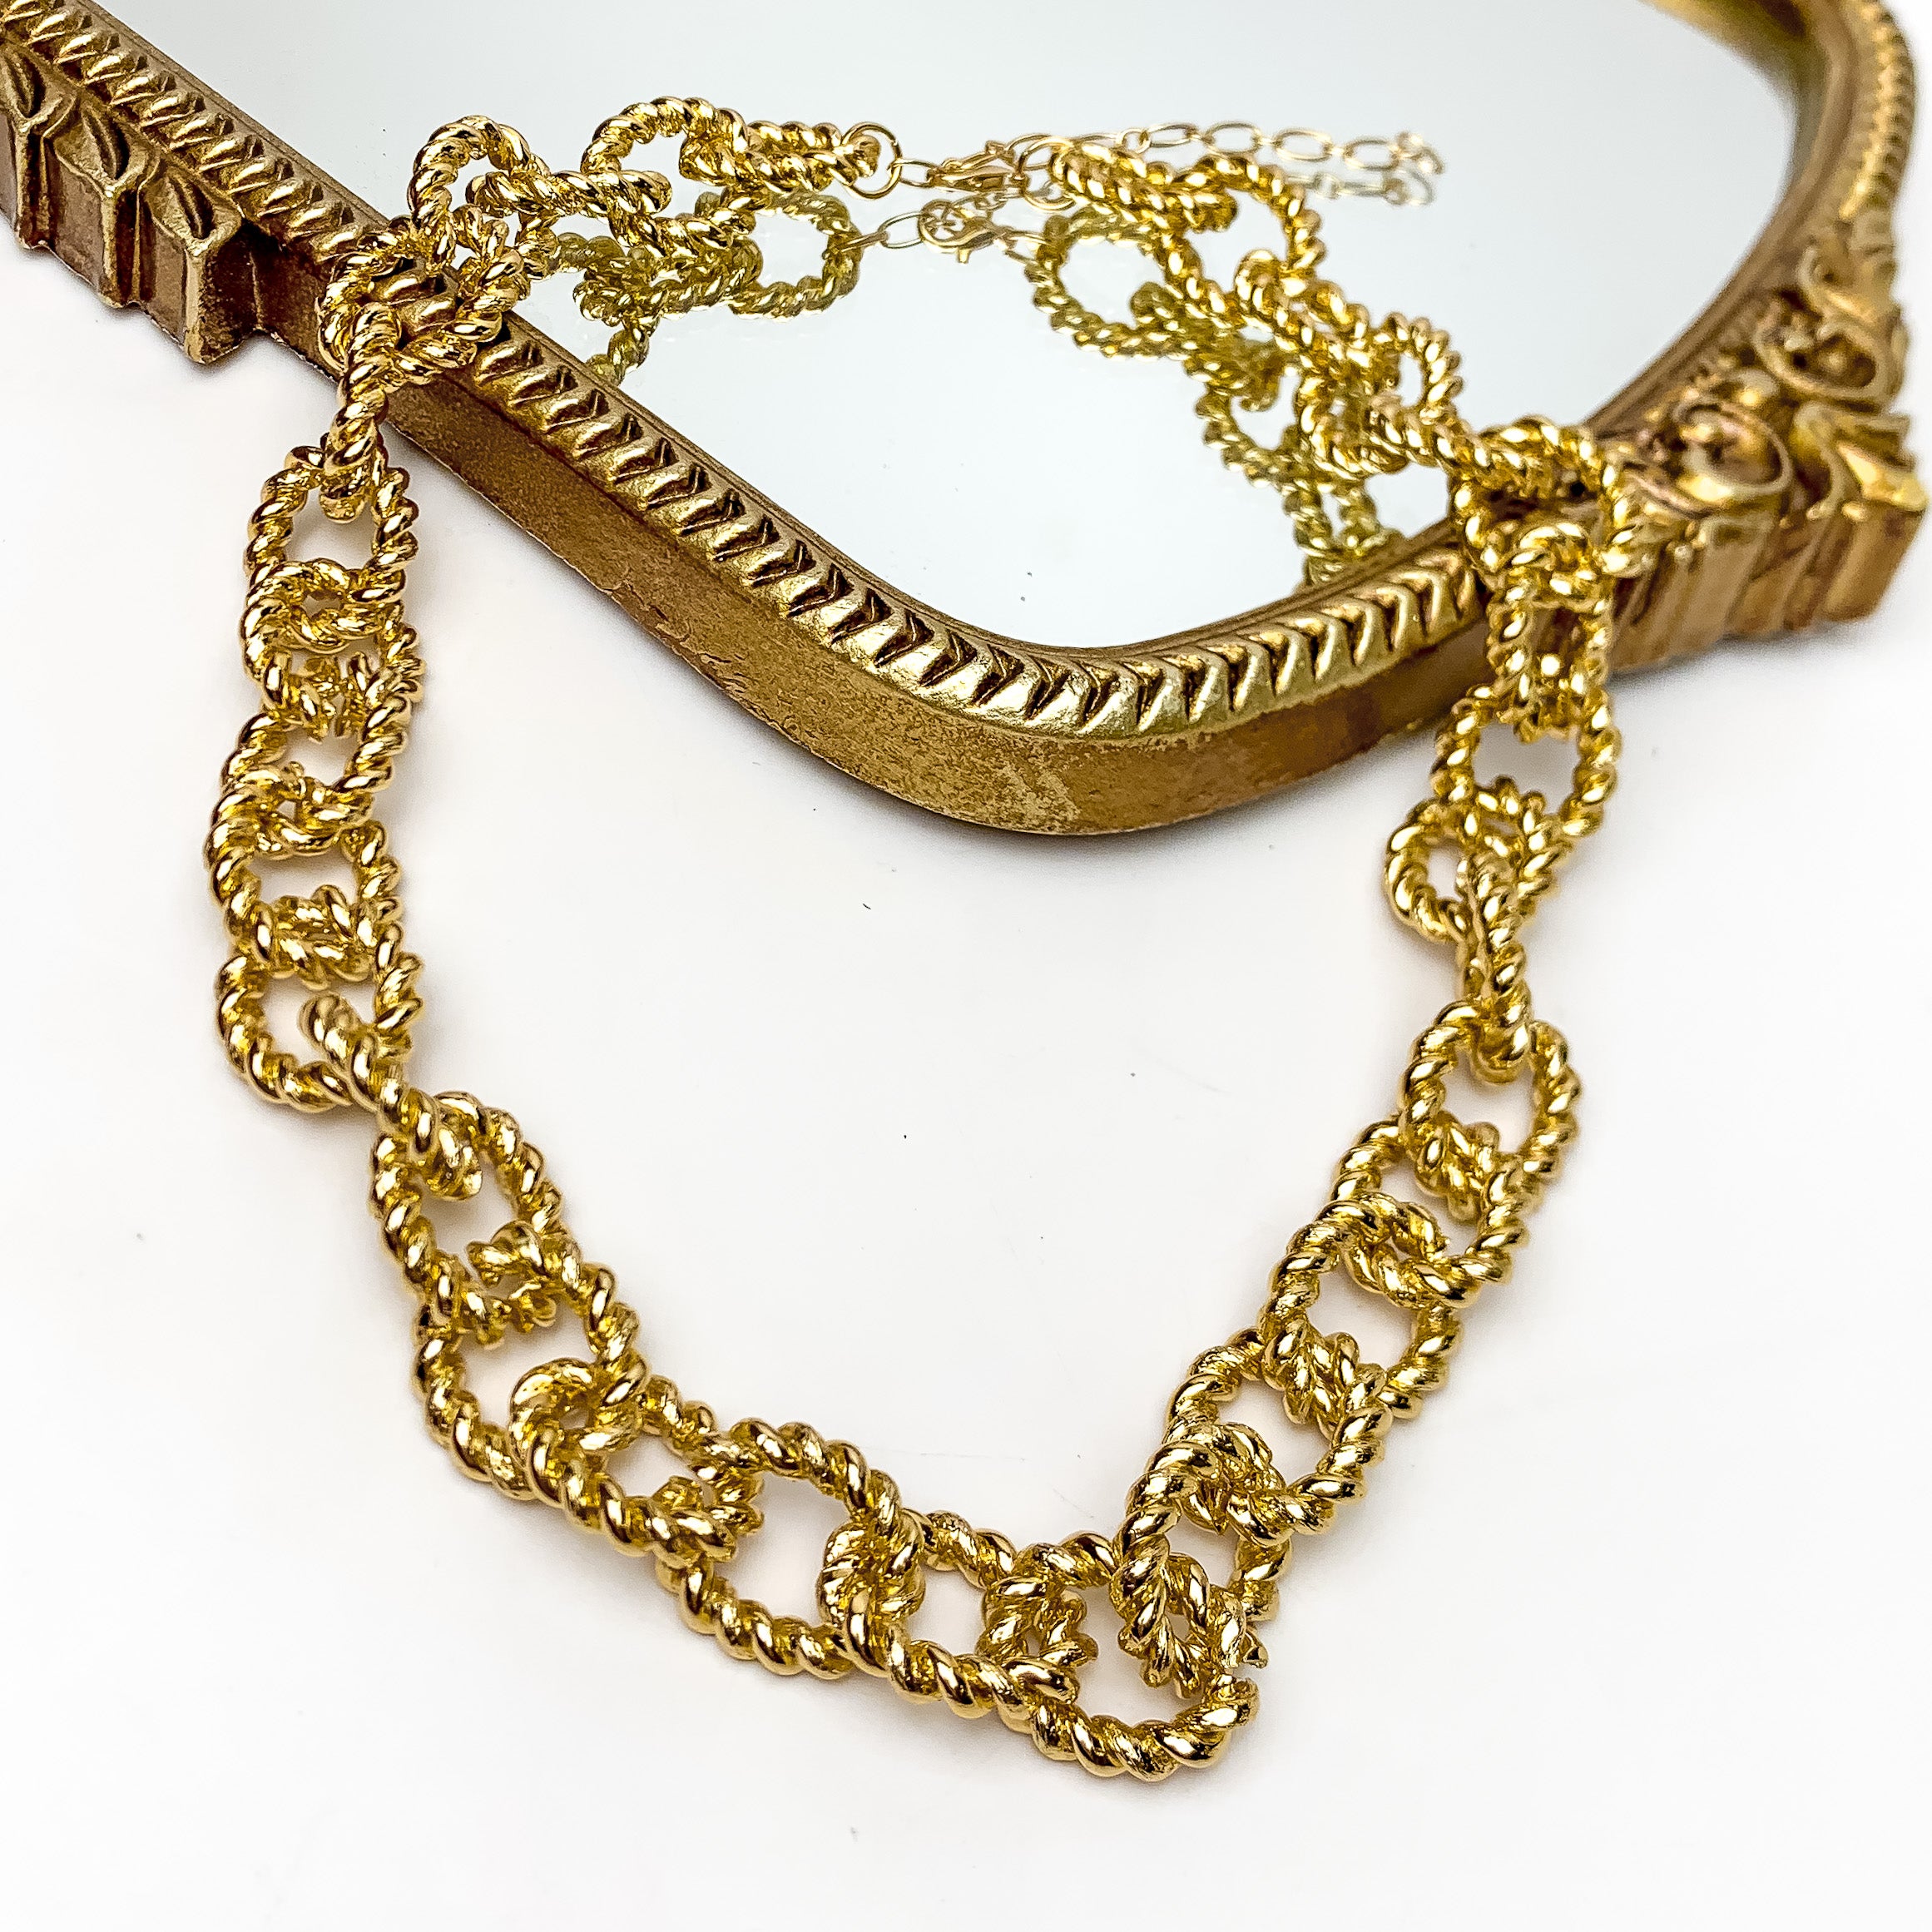 Fall Festivities Gold Tone Chain Necklace. This gold chained necklace is pictured on a white background with part of it laying on a mirror.